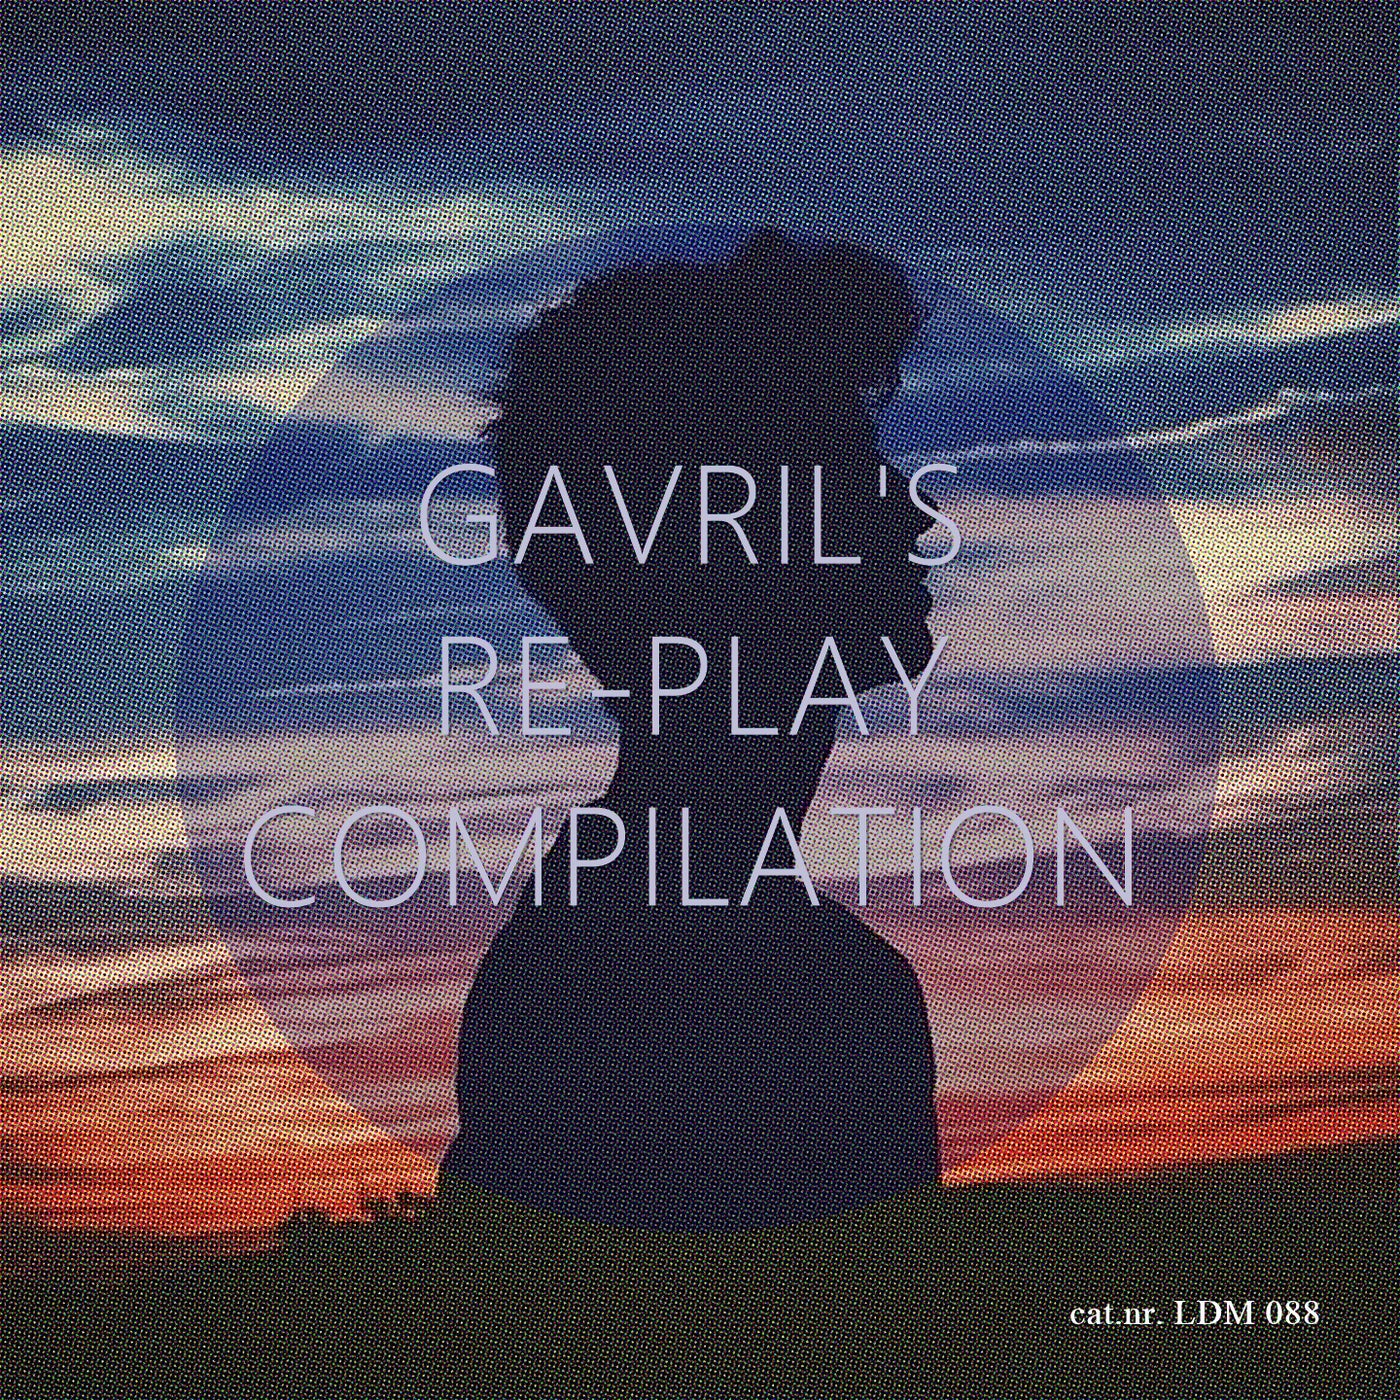 Gavril's Re-Play Compilation